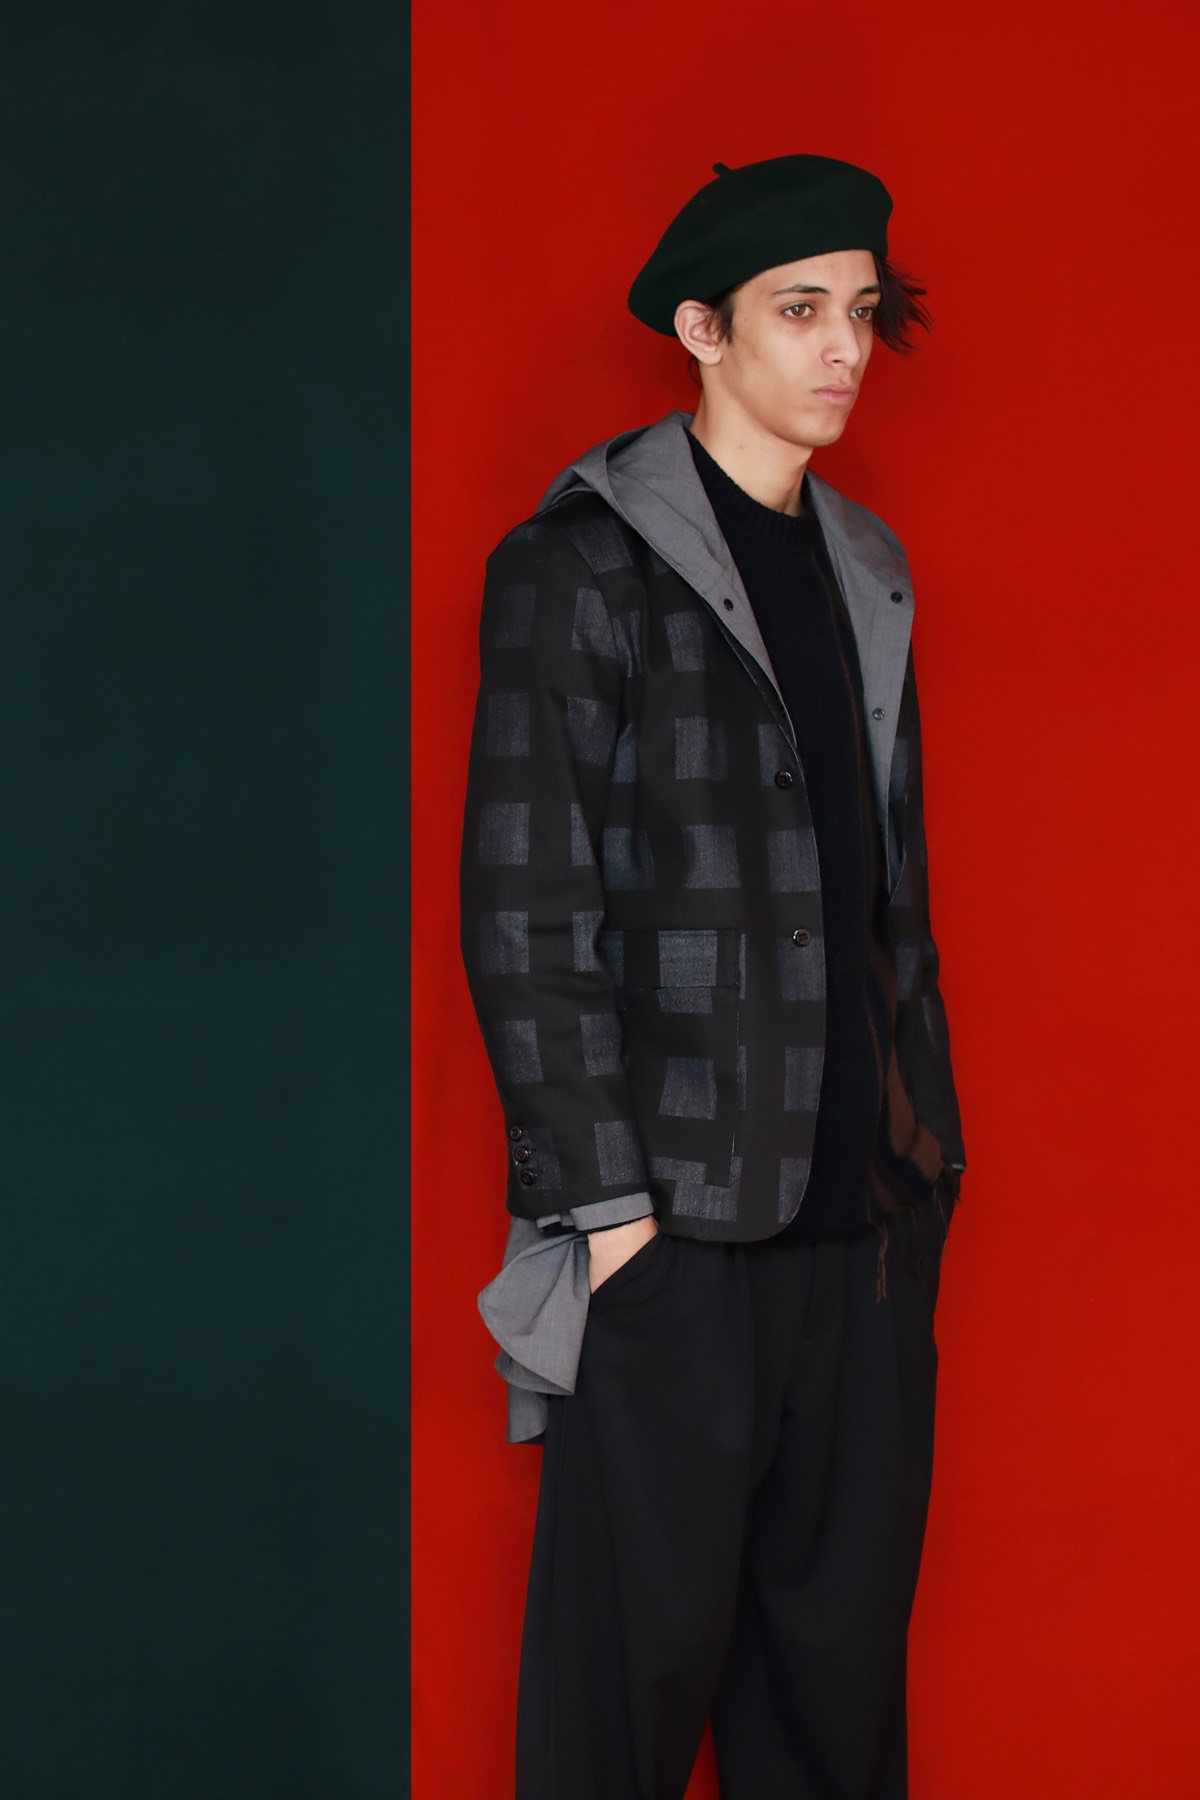 【MEN】JOHNBULL FALL WINTER 2019 COLLECTION アイテム